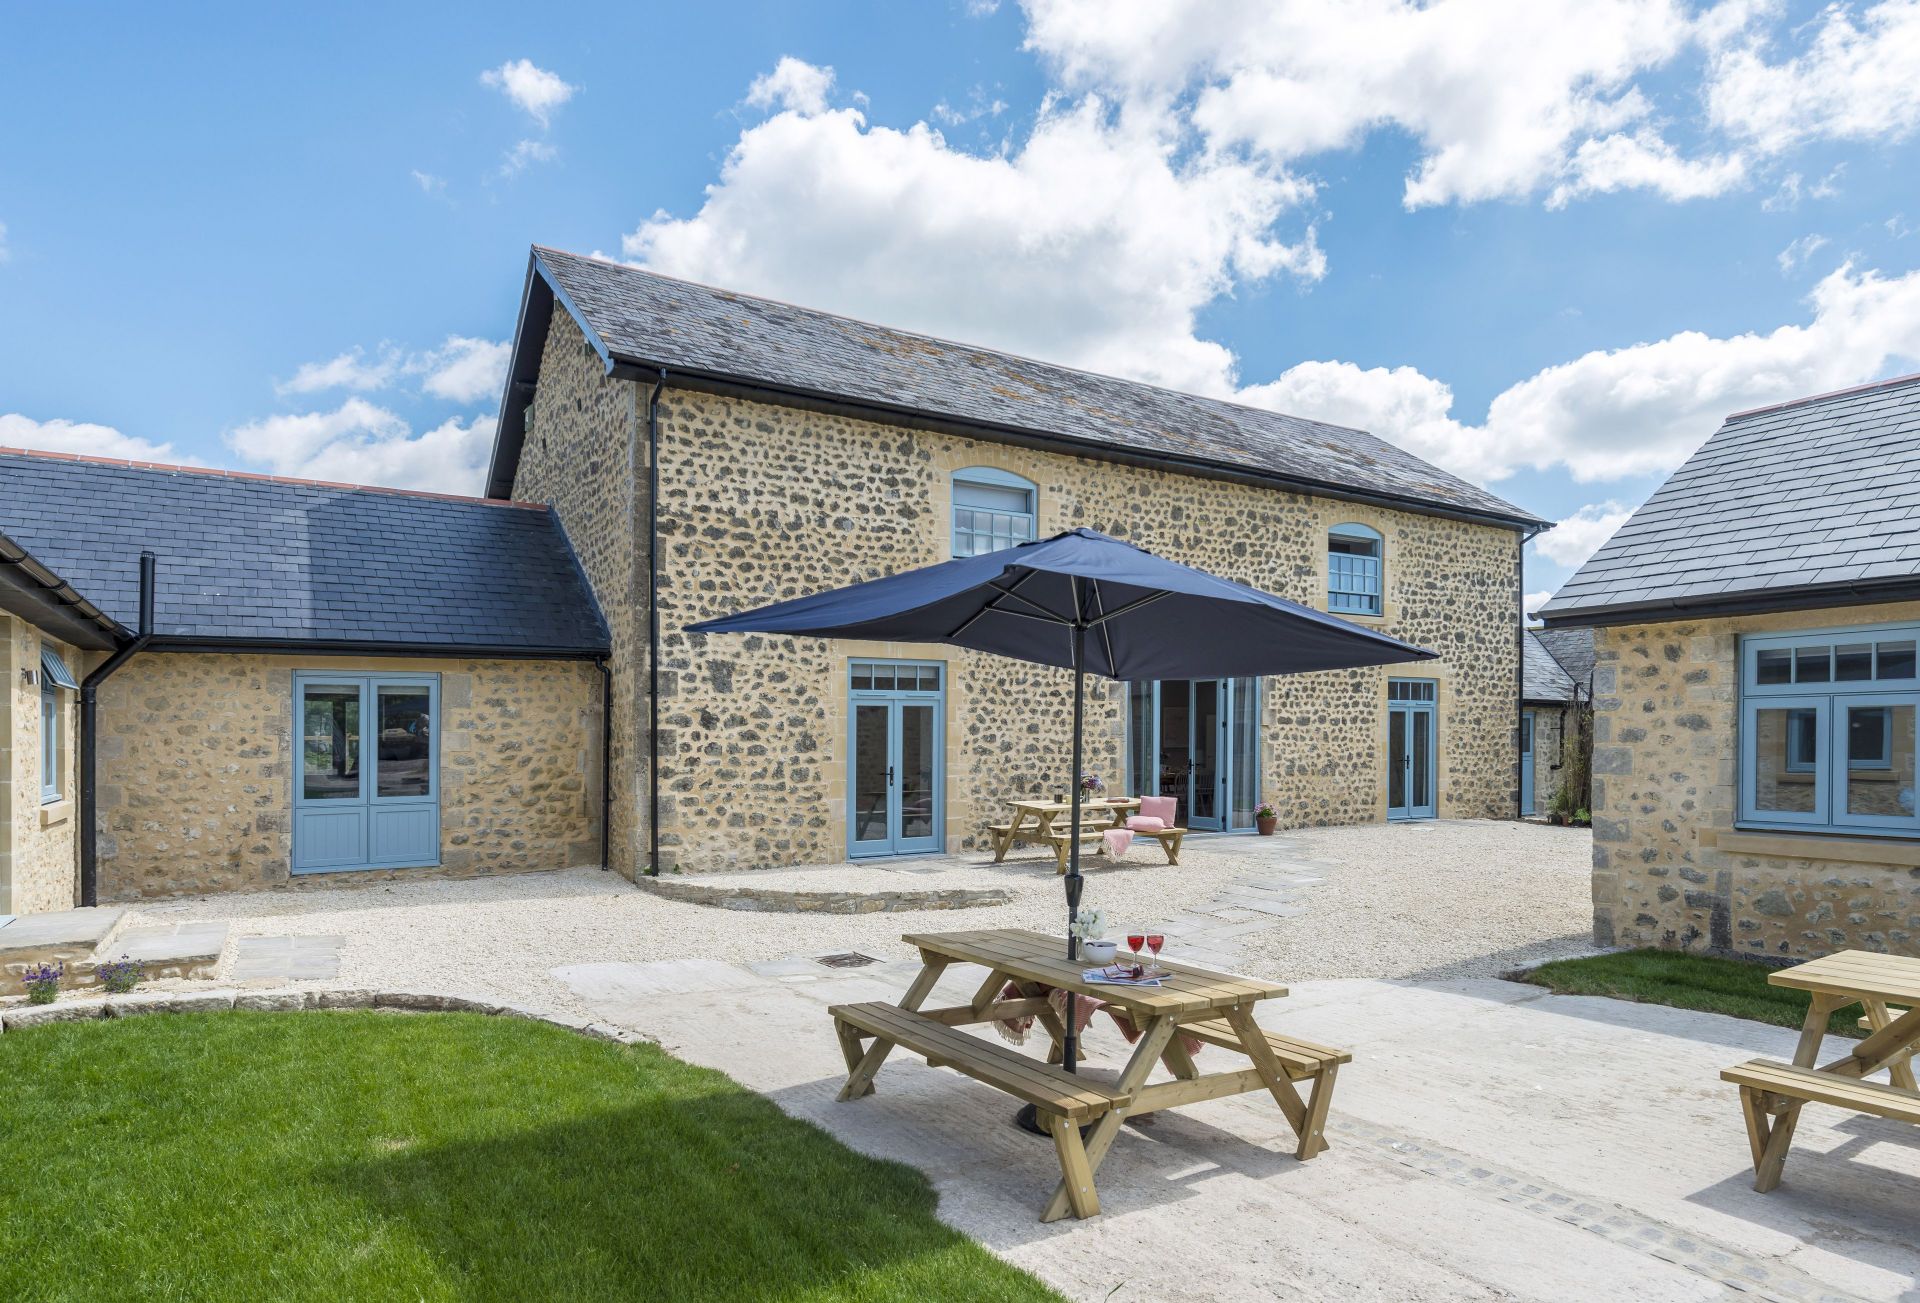 Stapleford Farm Cottages is located in Beaminster and surrounding villages